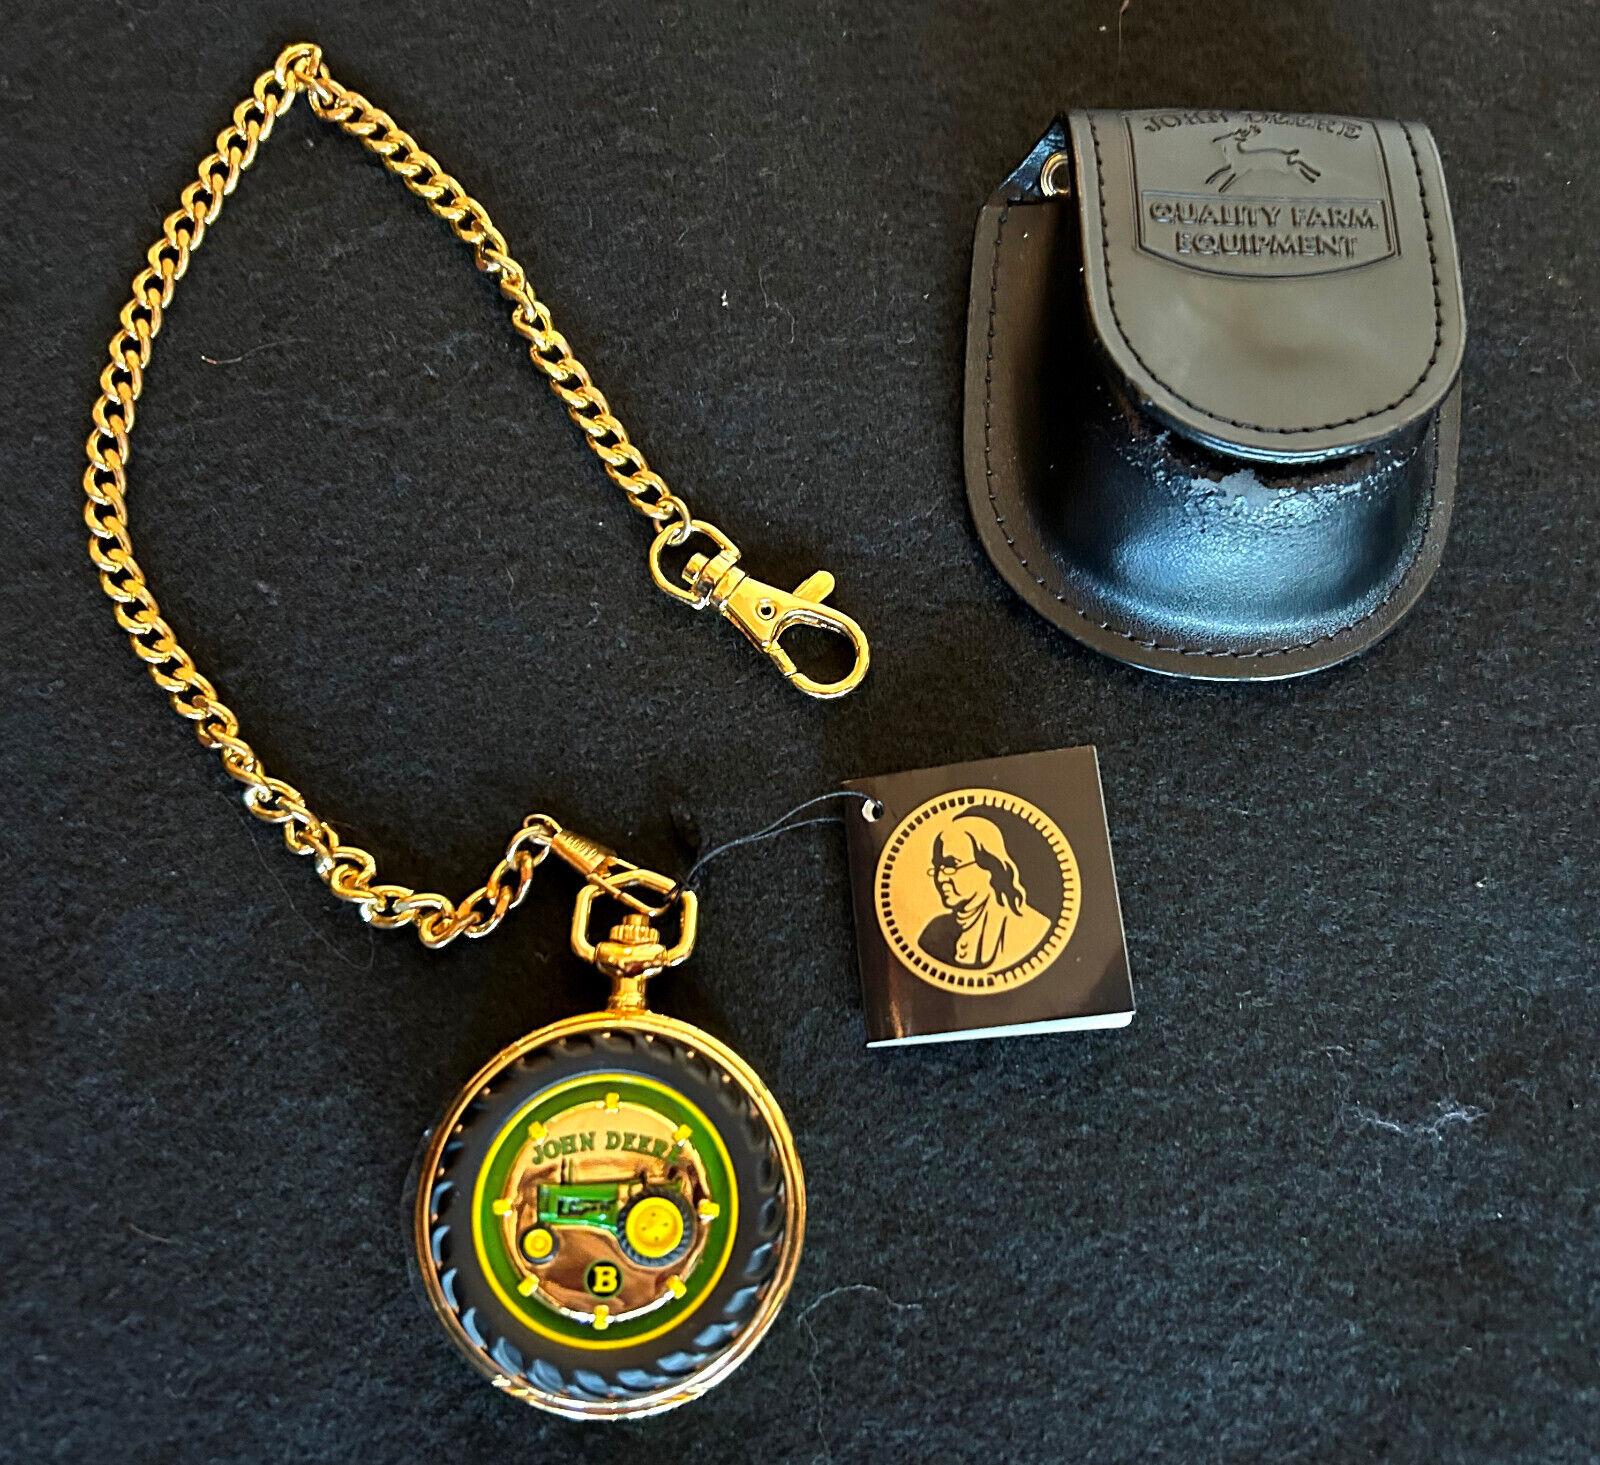 BNWT Franklin Mint John Deere Model B Tractor Pocket Watch with Case and Chain